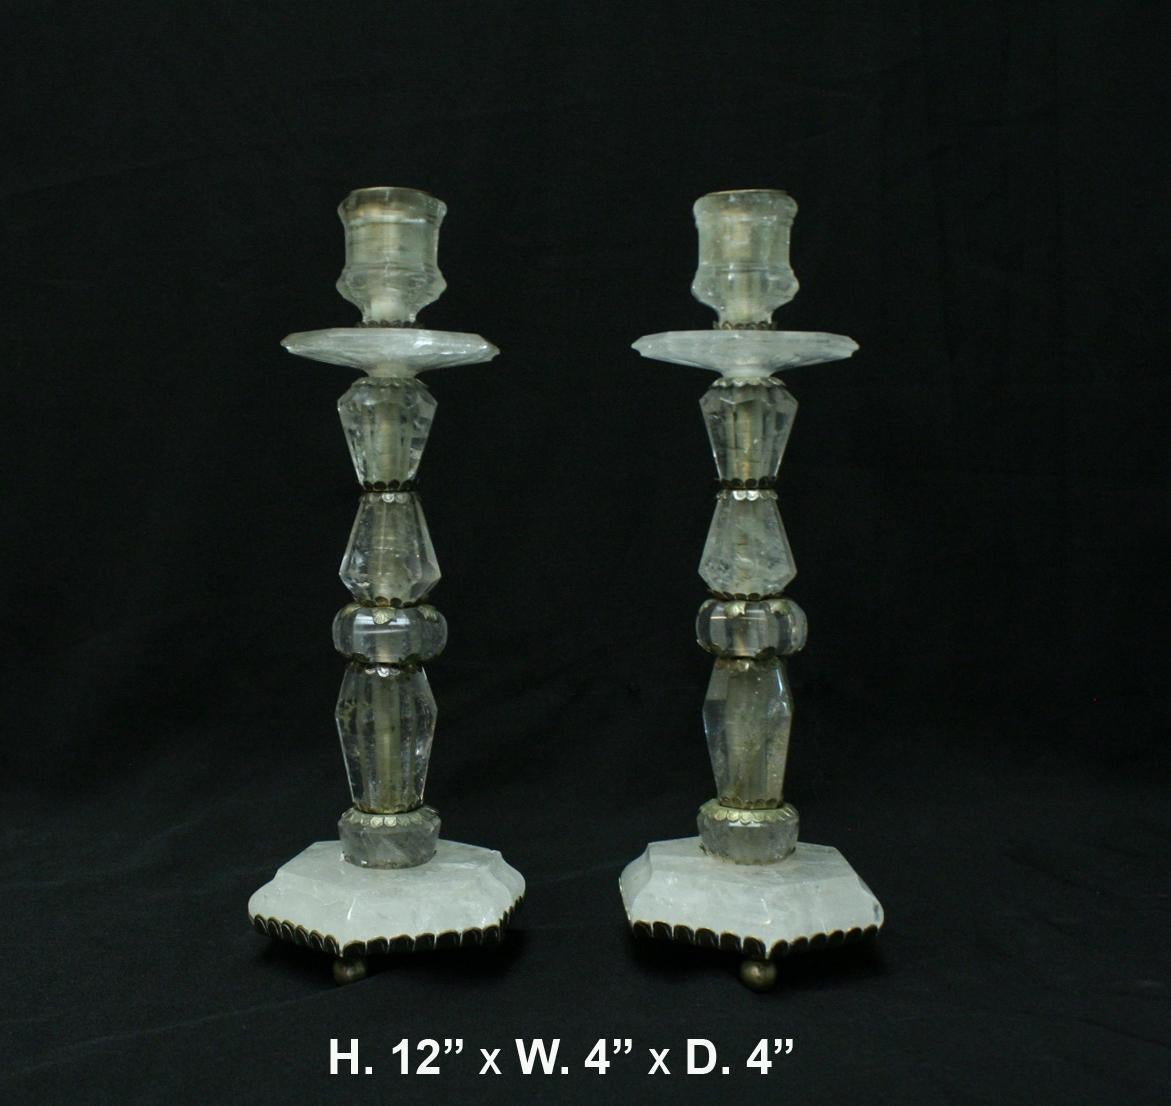 Spectacular hand carved and hand polished Rock Crystal candlesticks. 
A carved octagonal candleholder is over a conforming drip-pan, supported by a faceted Rock Crystal stem trimmed in a foliate motif, resting on a stepped base, raised on ball